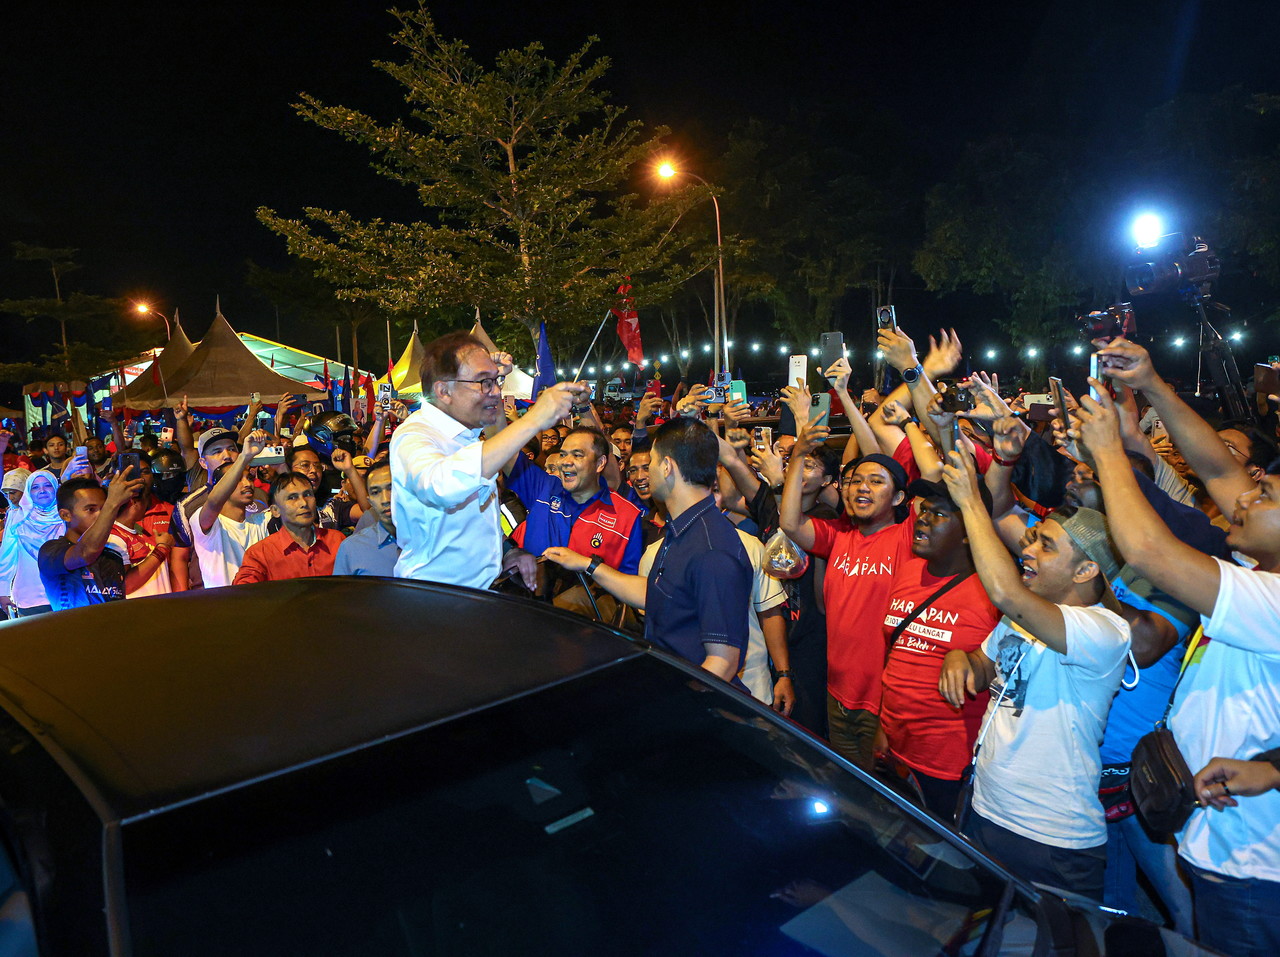 Use campaign to promote party, not slander opponents: Anwar tells Muhyiddin